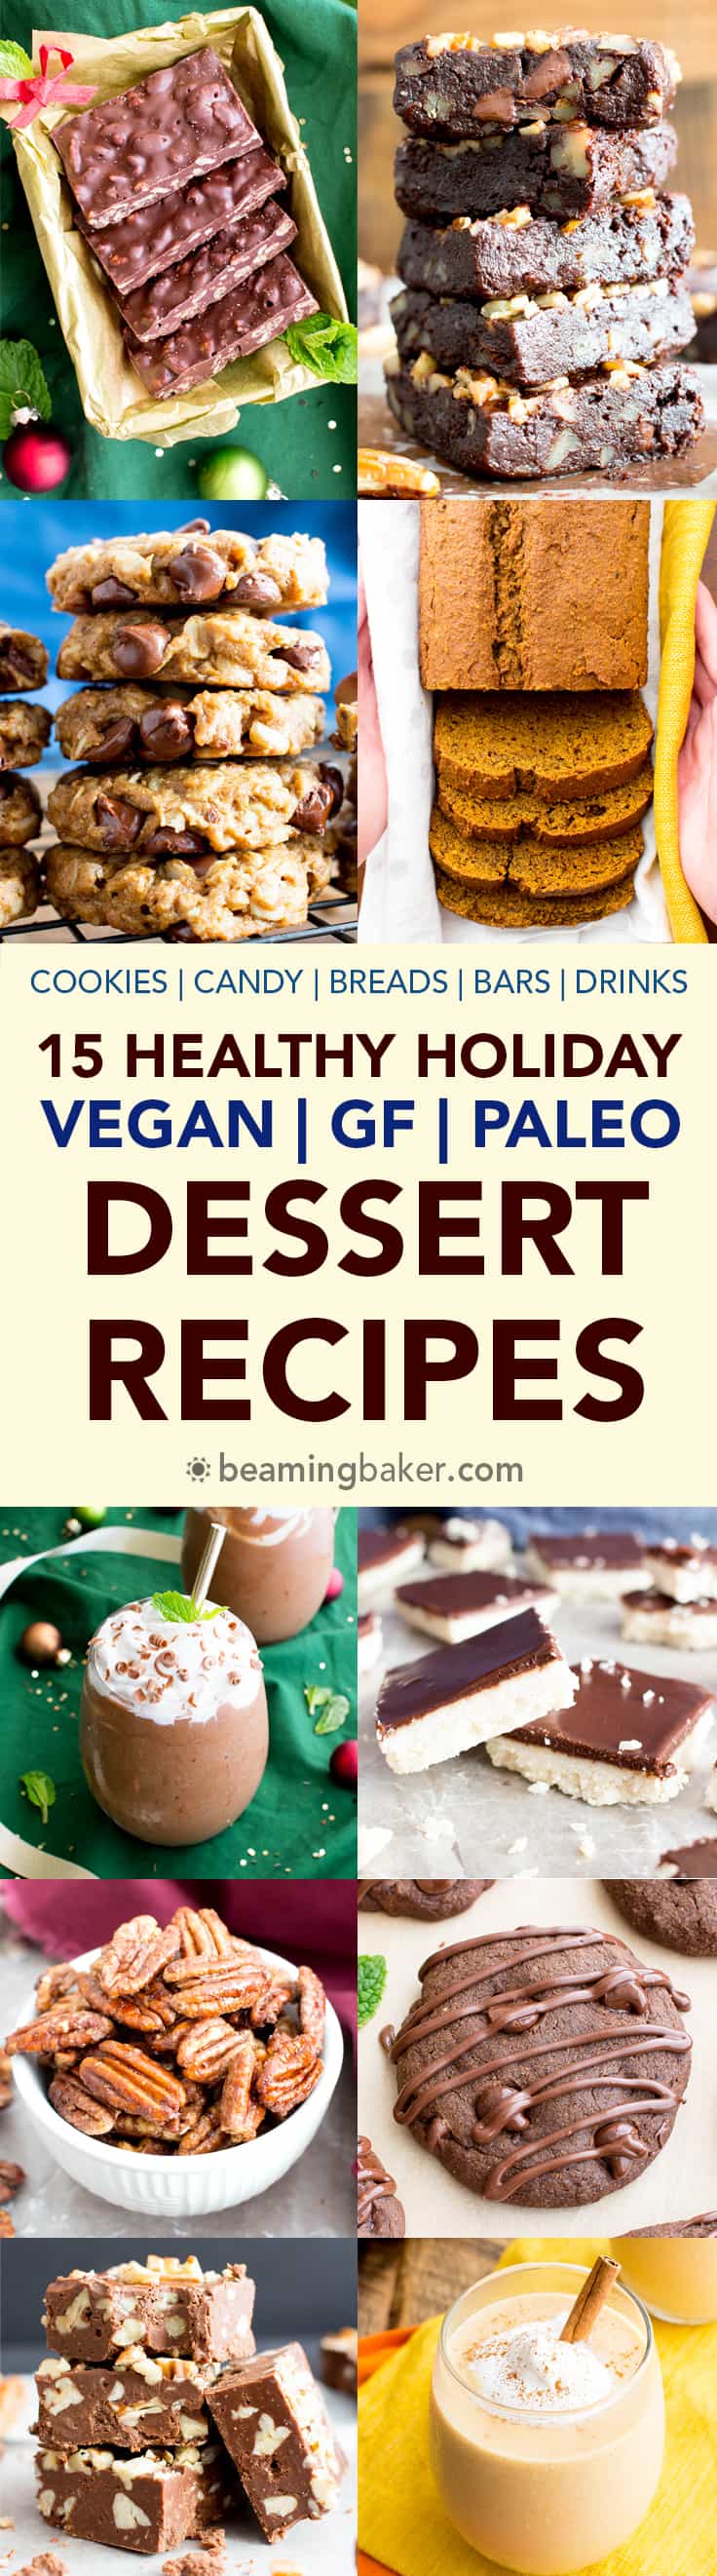 15 Gluten Free Vegan Healthy Holiday Dessert Recipes (V, GF): A festive collection of the best healthy holiday desserts to enjoy with friends and family! #Vegan #GlutenFree #DairyFree #Paleo #Holiday #Dessert #Healthy | BeamingBaker.com